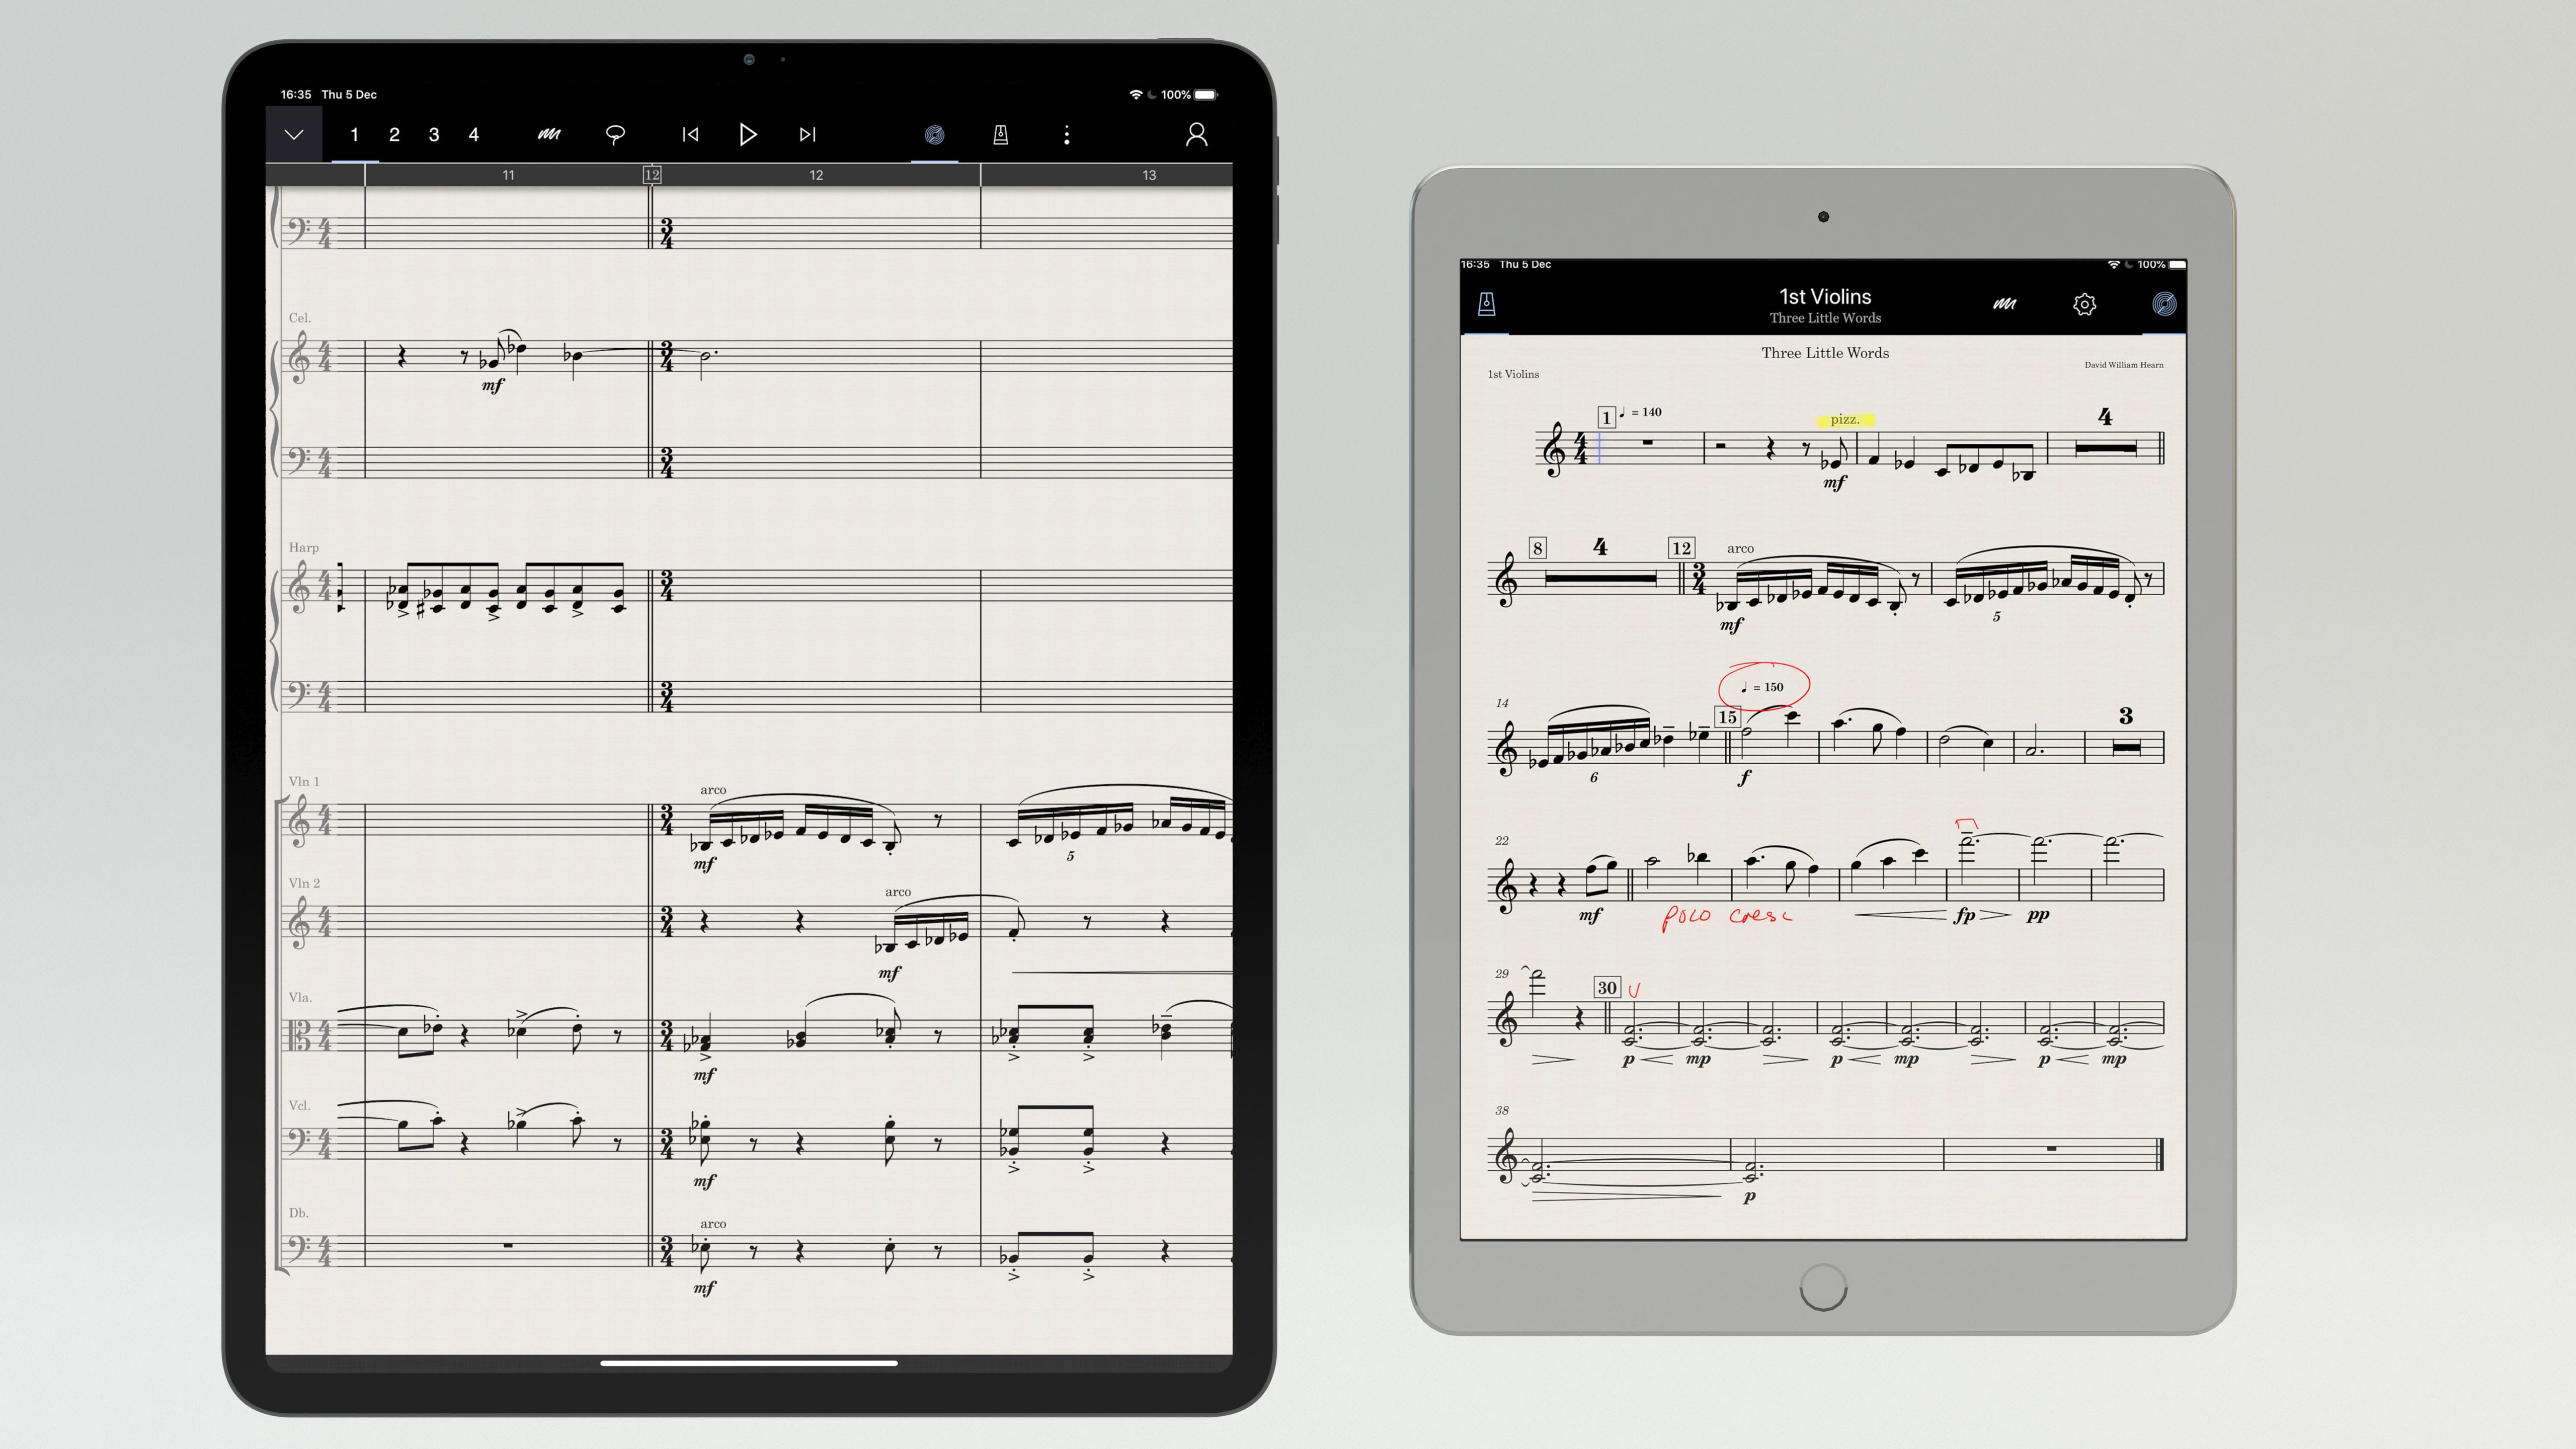 Playing the score – StaffPad Help